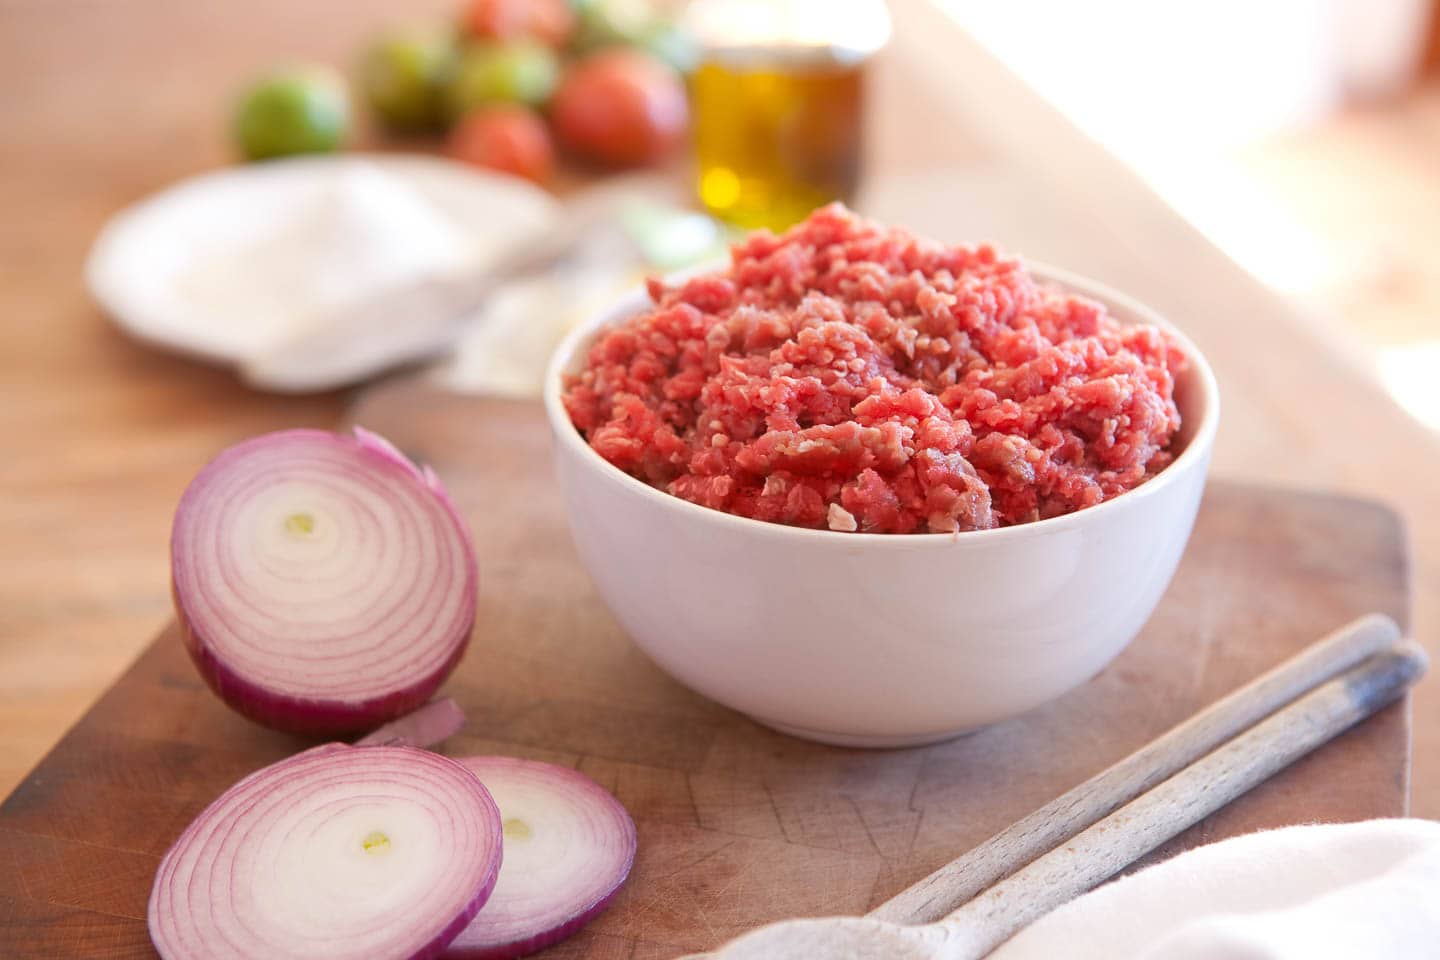 raw ground beef in a bowl with onions beside it and other nacho ingredients in the background